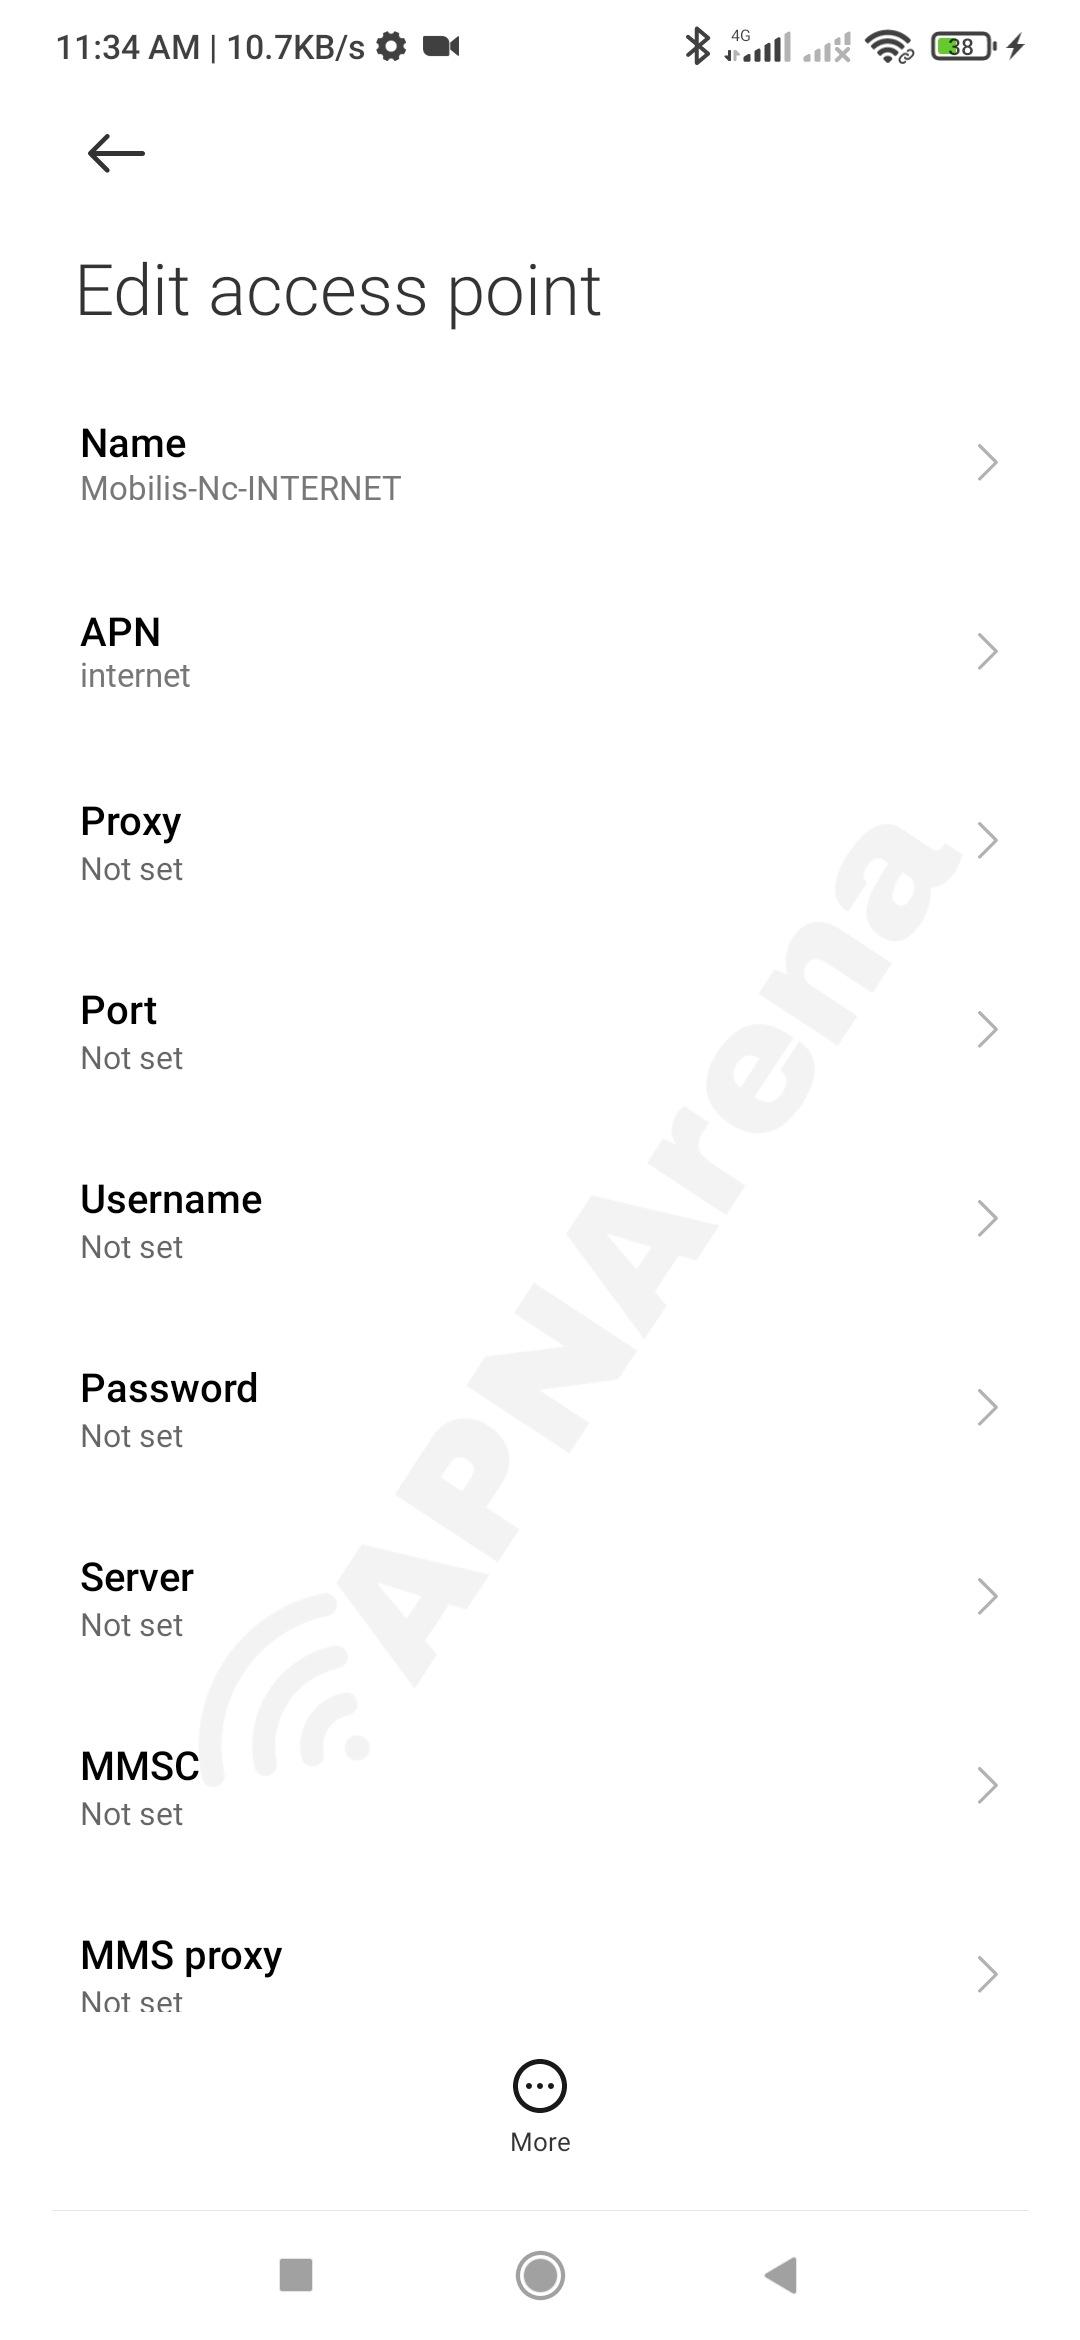 Mobilis New Caledonia APN Settings for Android